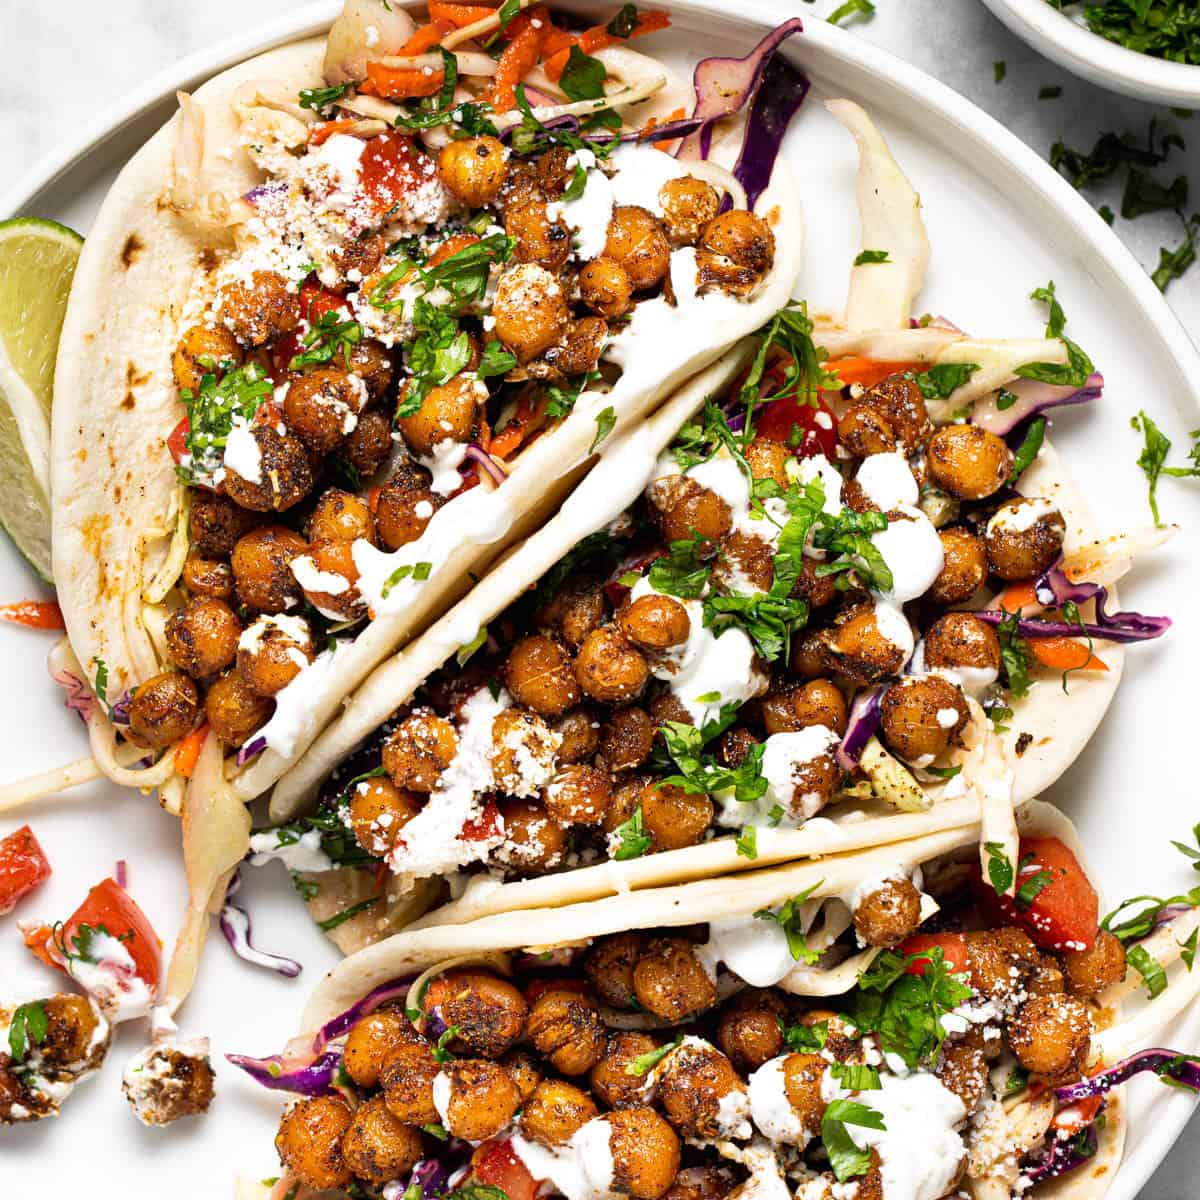 LUTEAL PHASE RECIPE: CHICKPEA TACOS WITH AVOCADO SAUCE – Marea Wellness